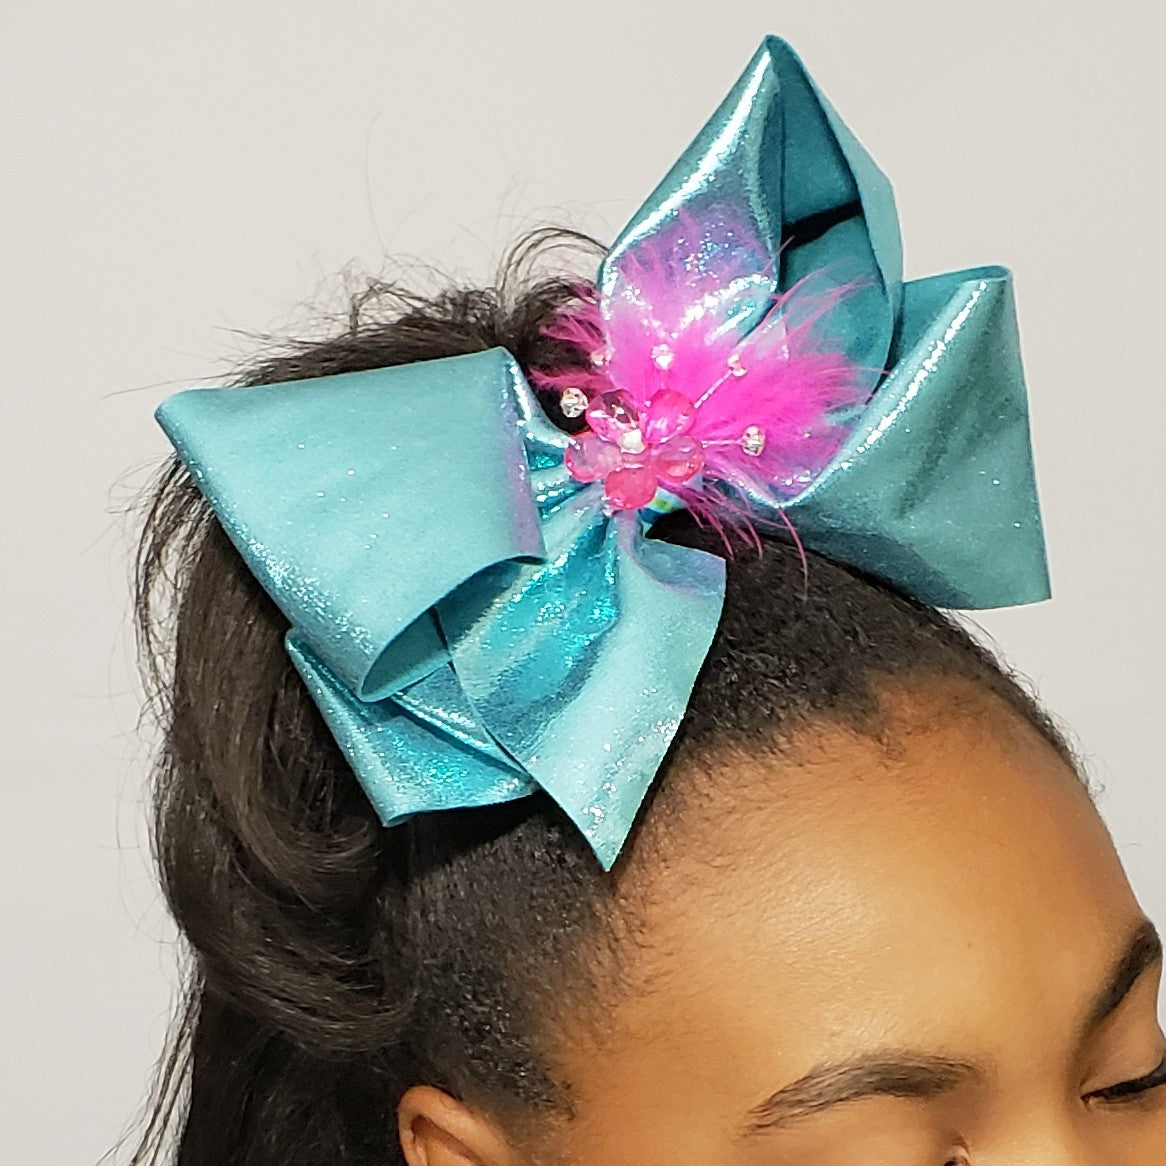 Zyilaya Glitzy Feathers & Flowers Bow in Turquoise & Fuchsia - Houzz of DVA Boutique